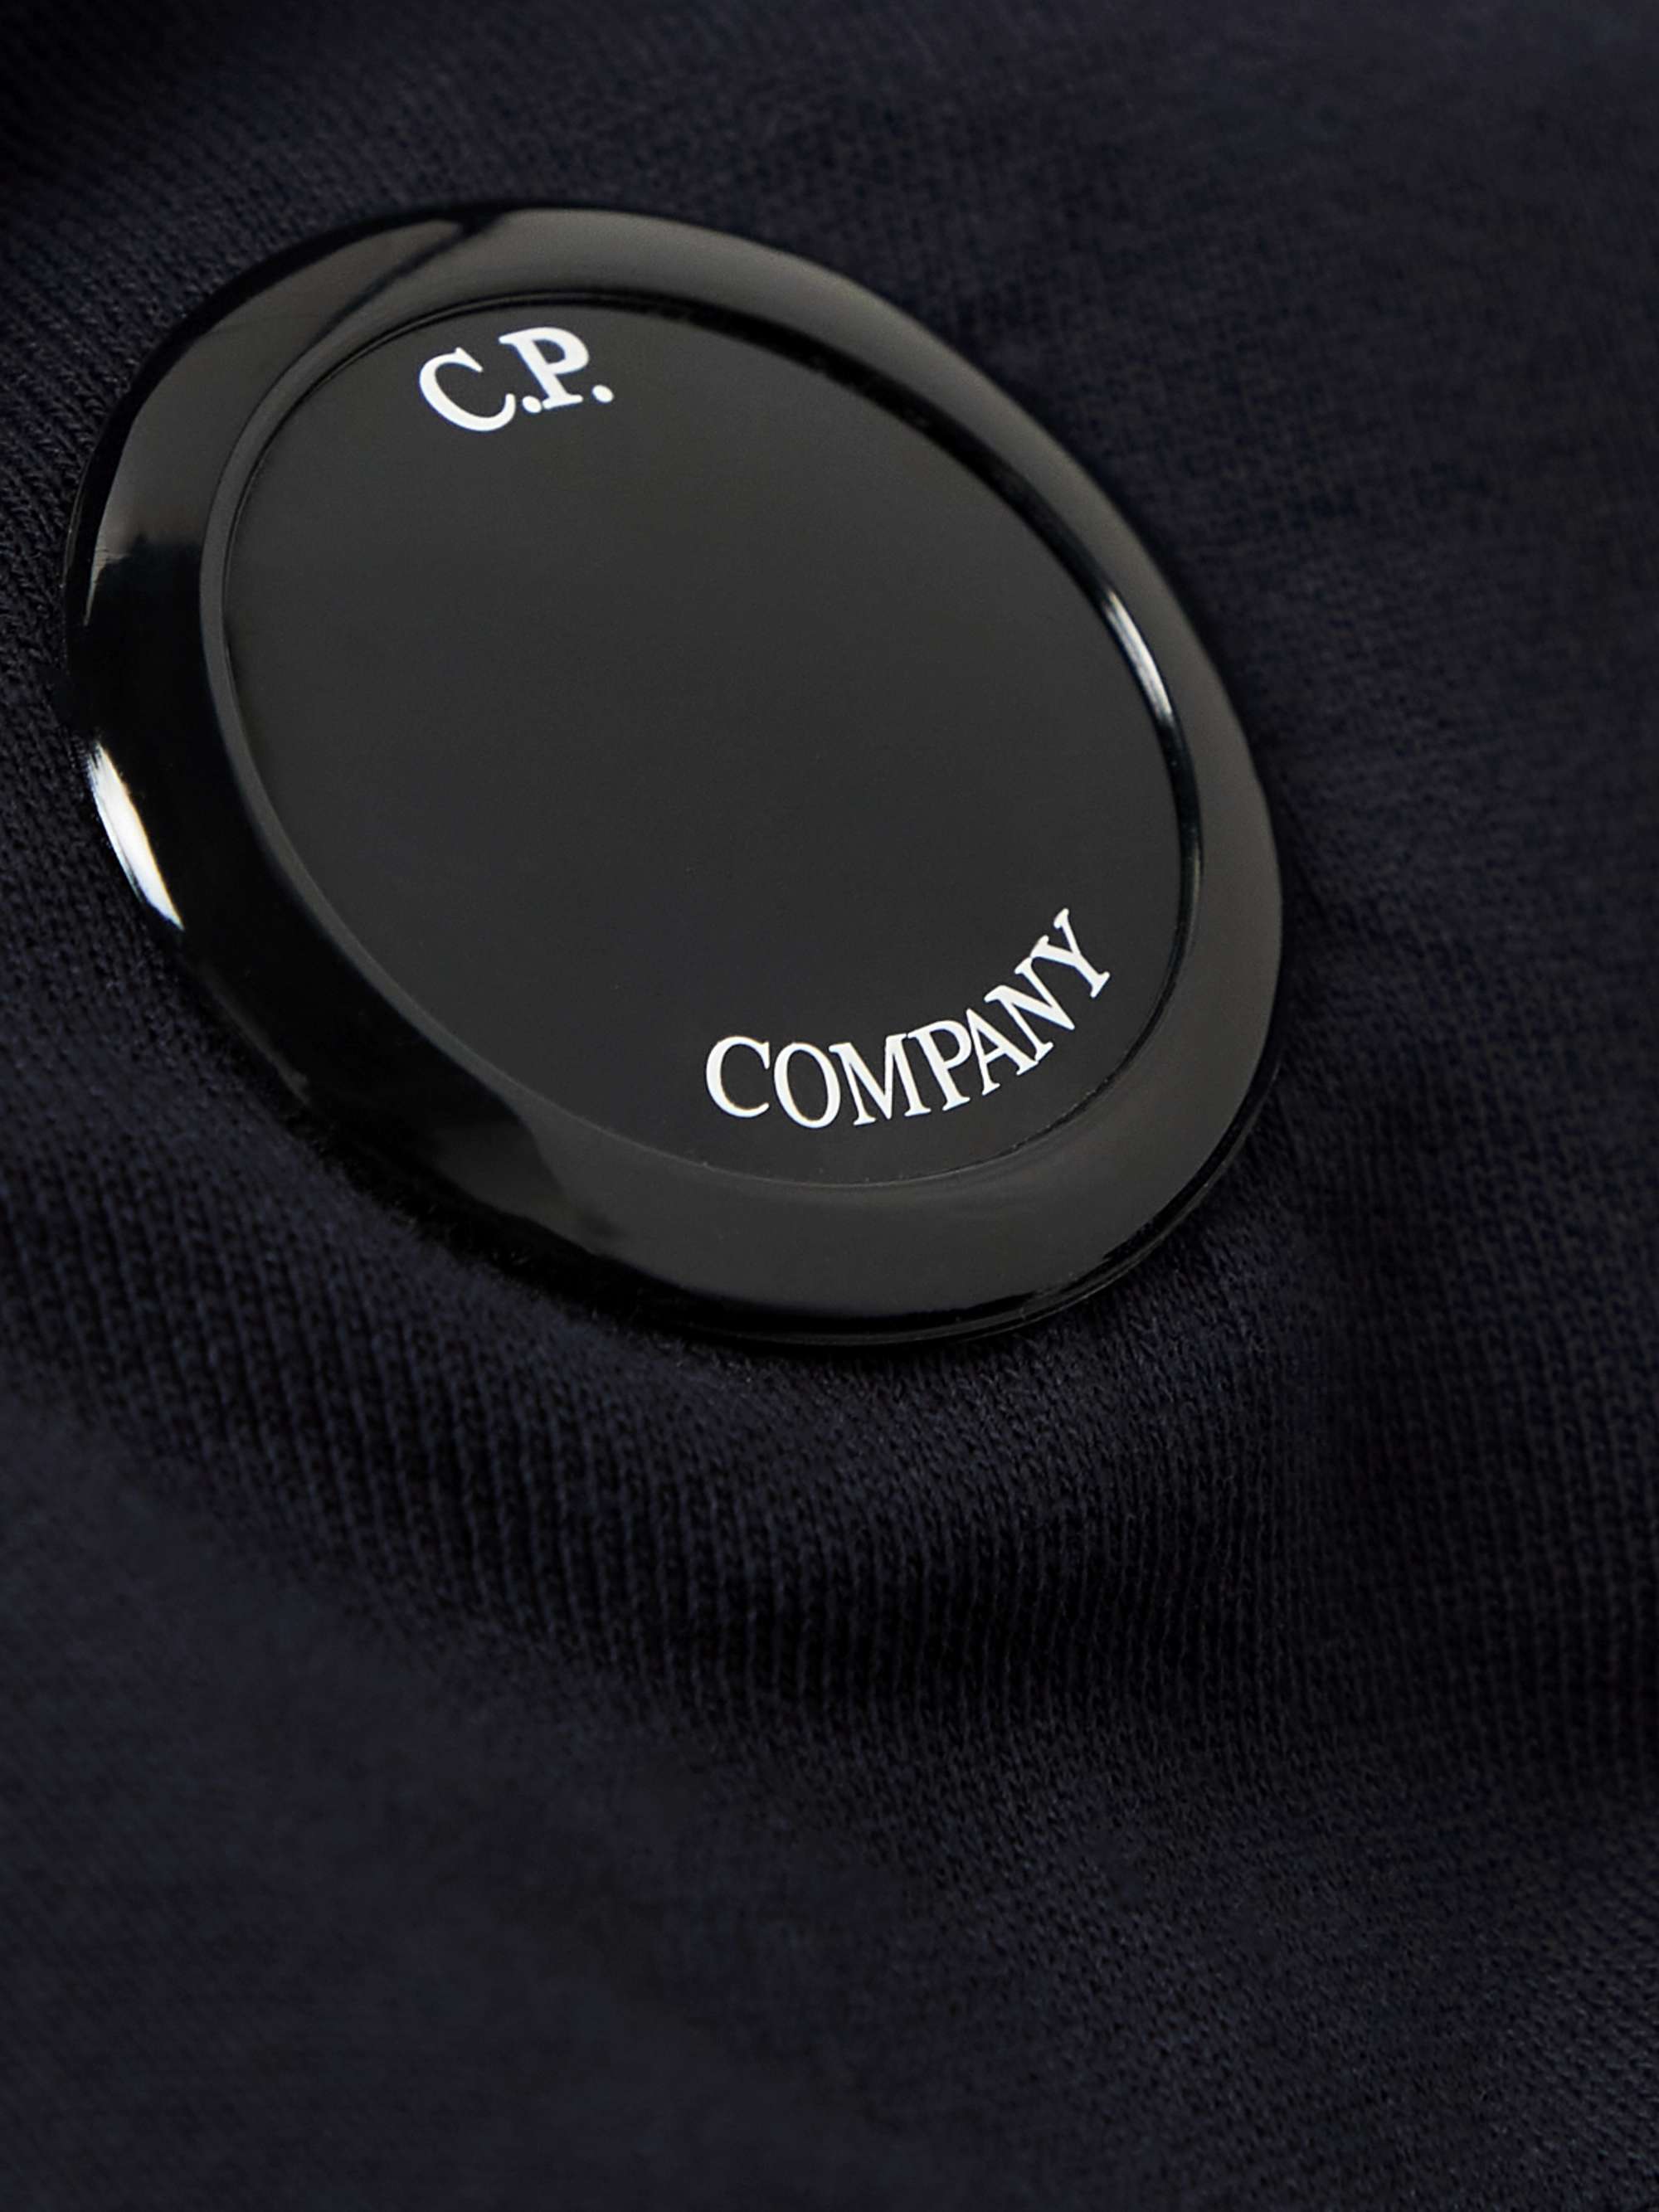 C.P. COMPANY Logo-Embellished Cotton-Jersey Hoodie